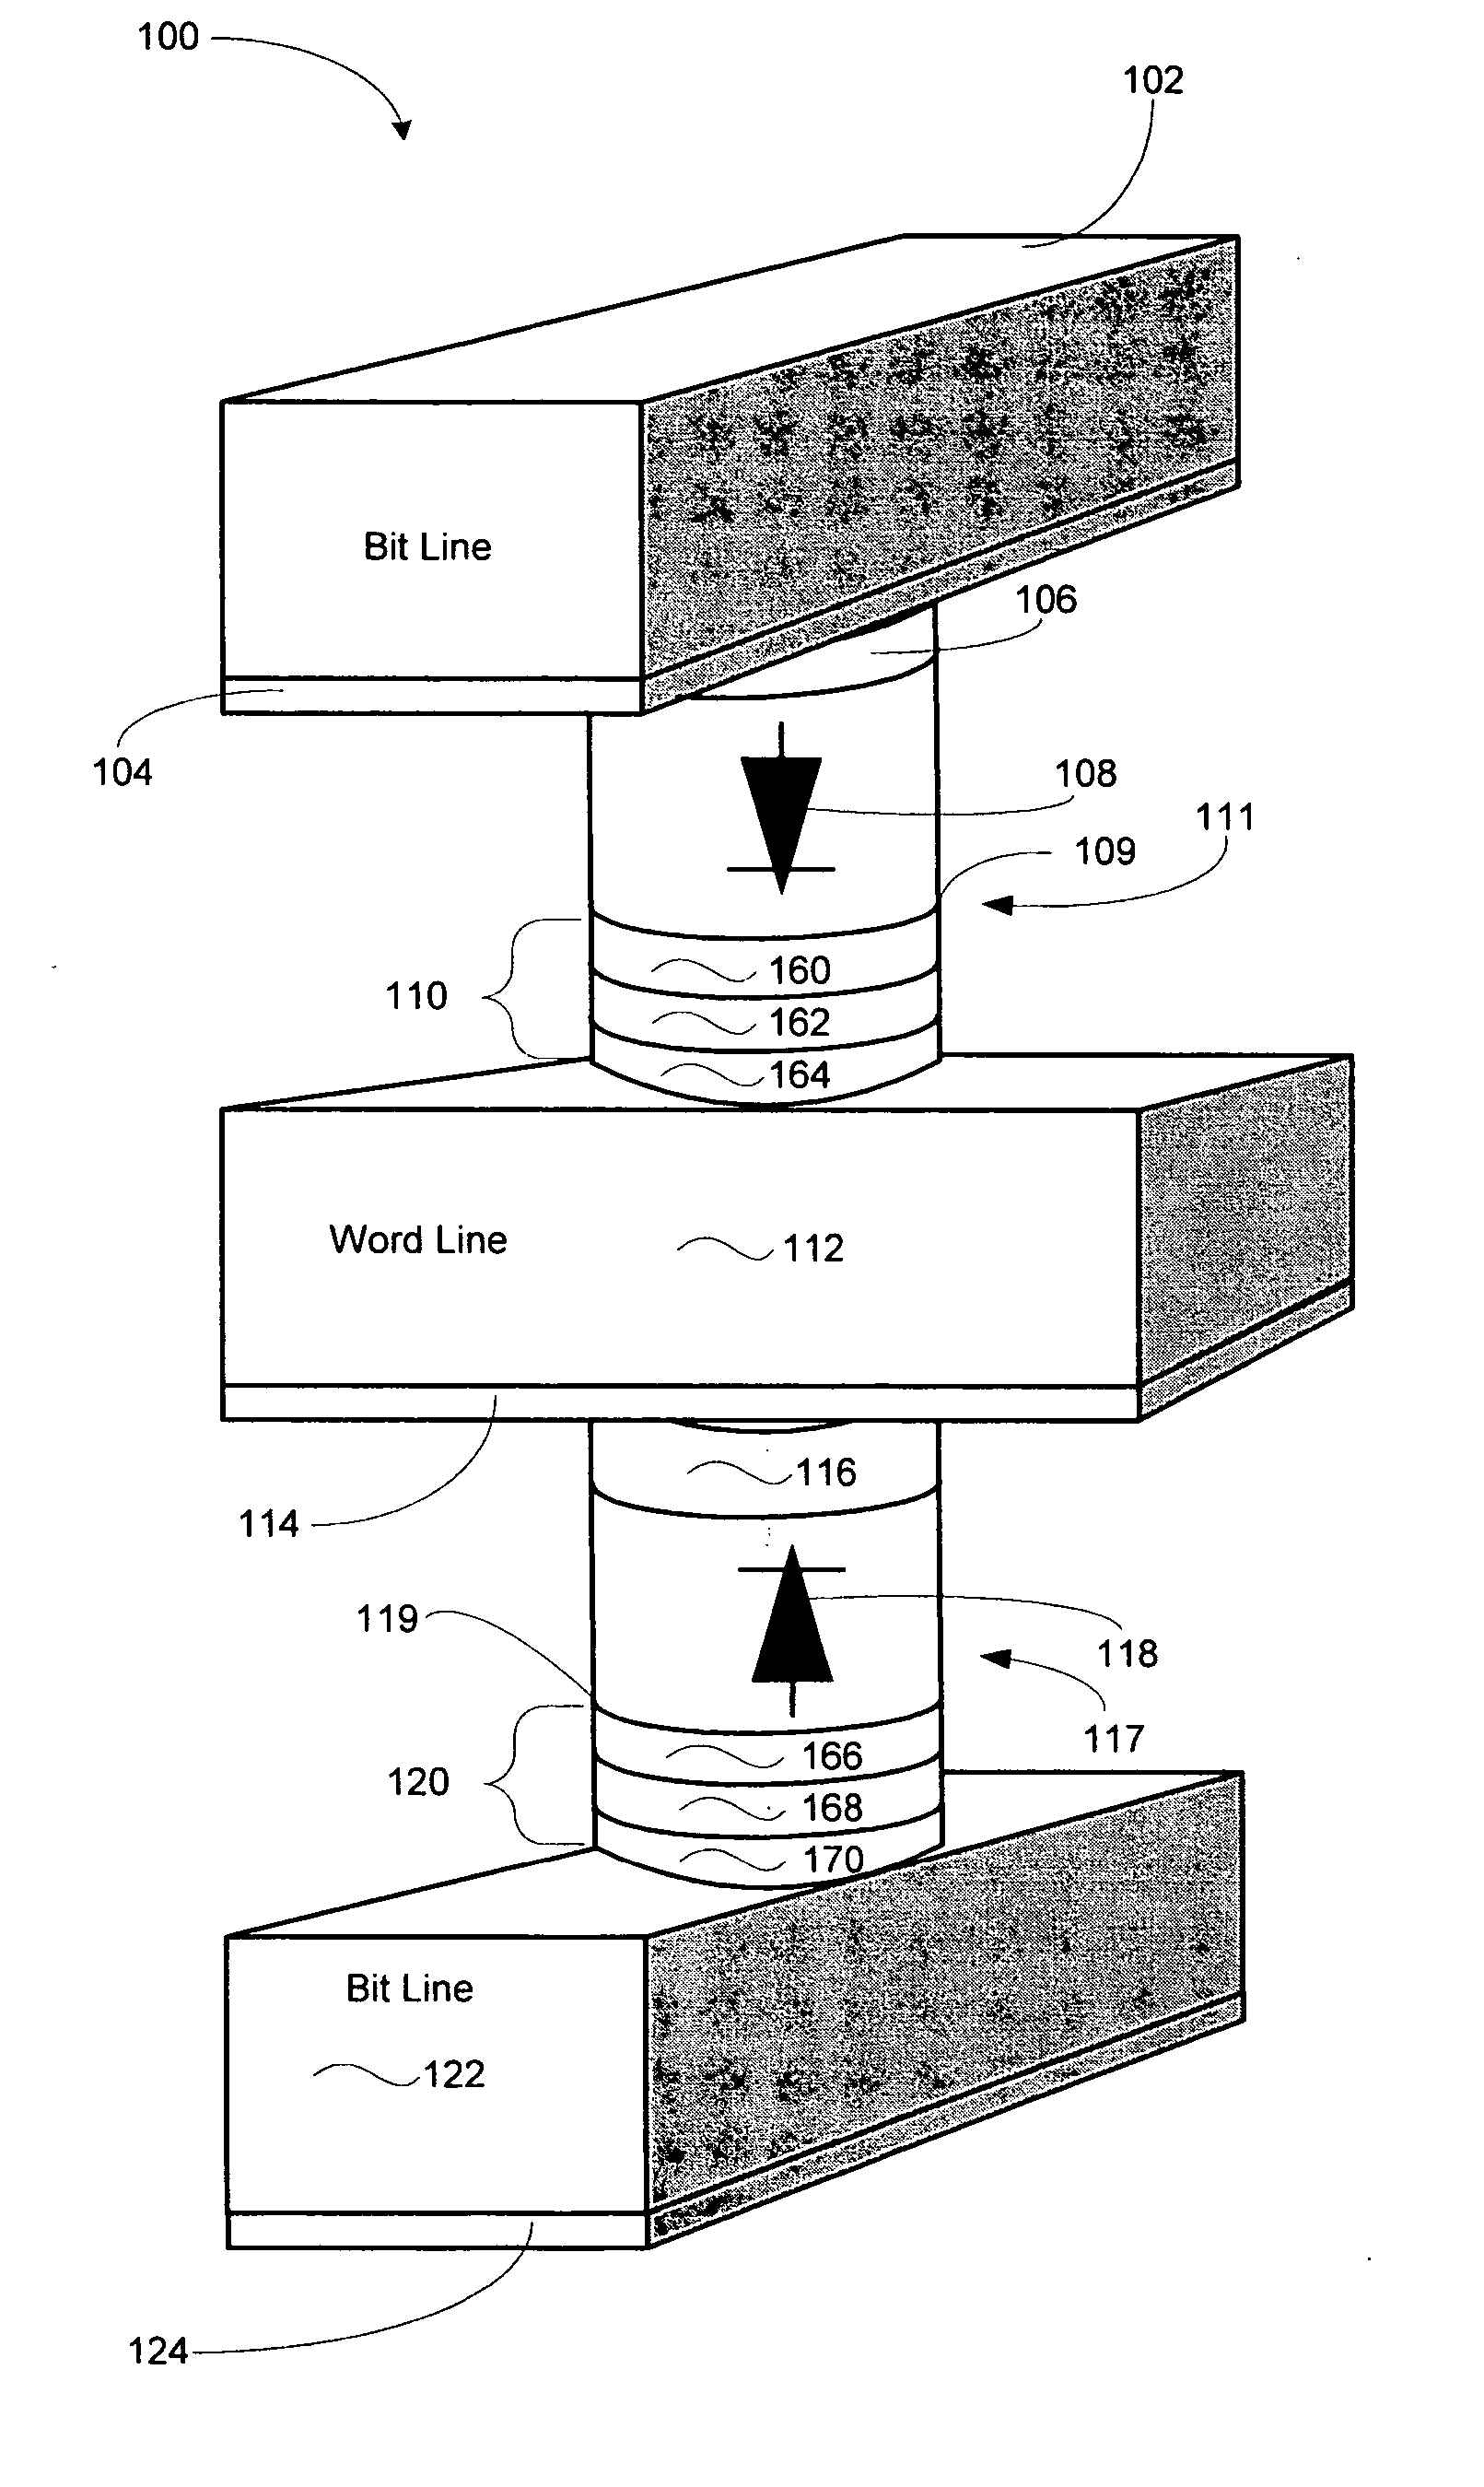 Unipolar resistance random access memory (RRAM) device and vertically stacked architecture